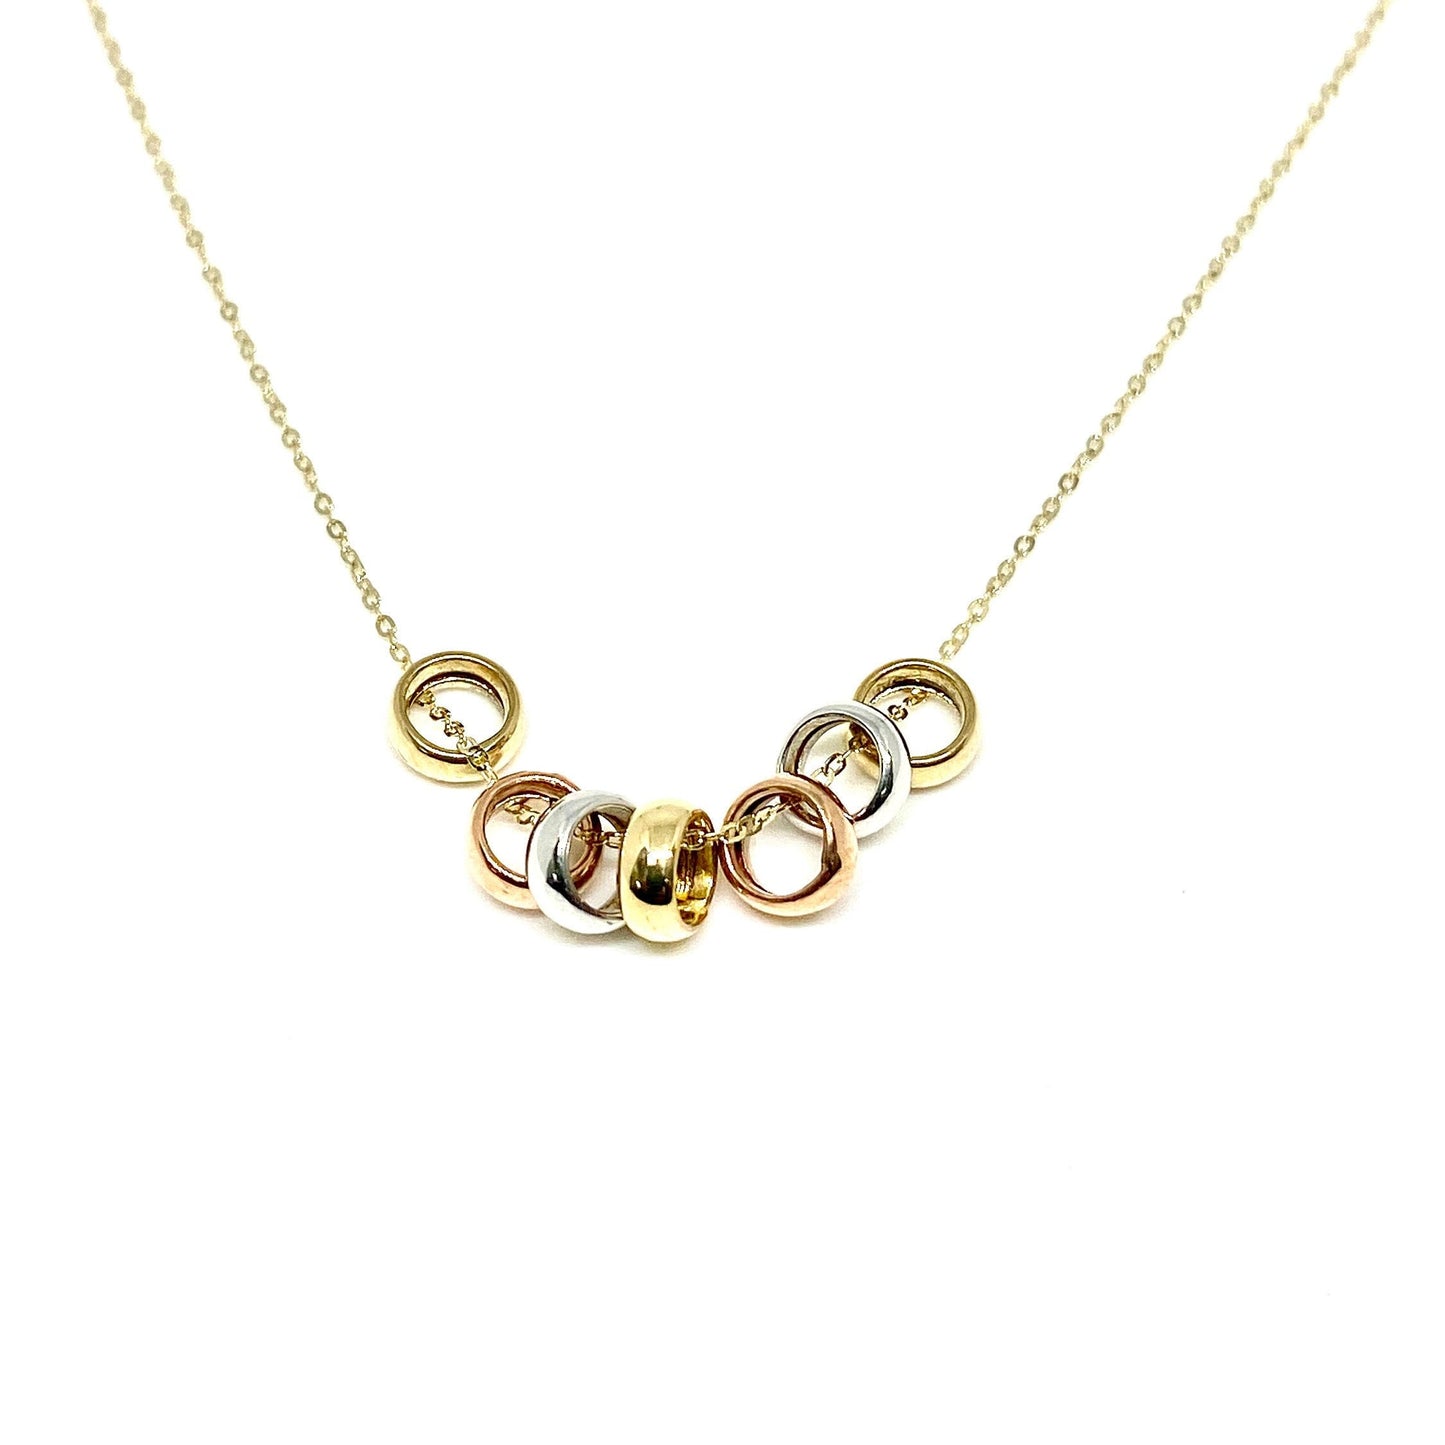 Tri-Color Gold 7 Round Lucky Rings Pendant Chain Necklace